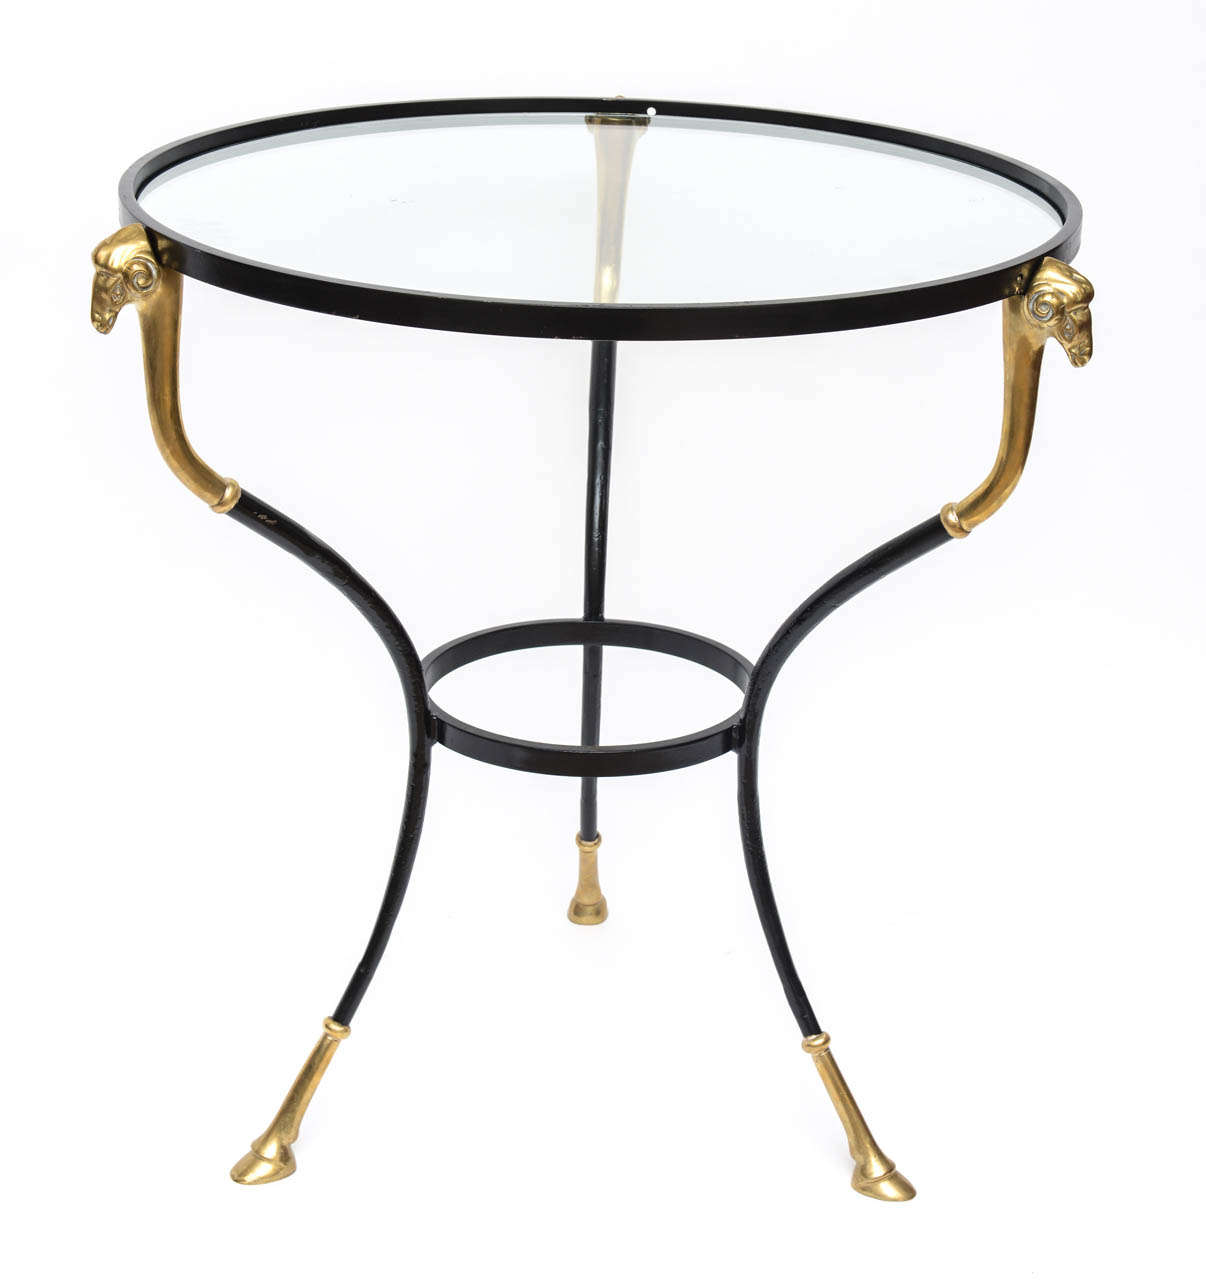 Italian Regency Glass Top Table with Brass Detail In Good Condition For Sale In Miami, FL